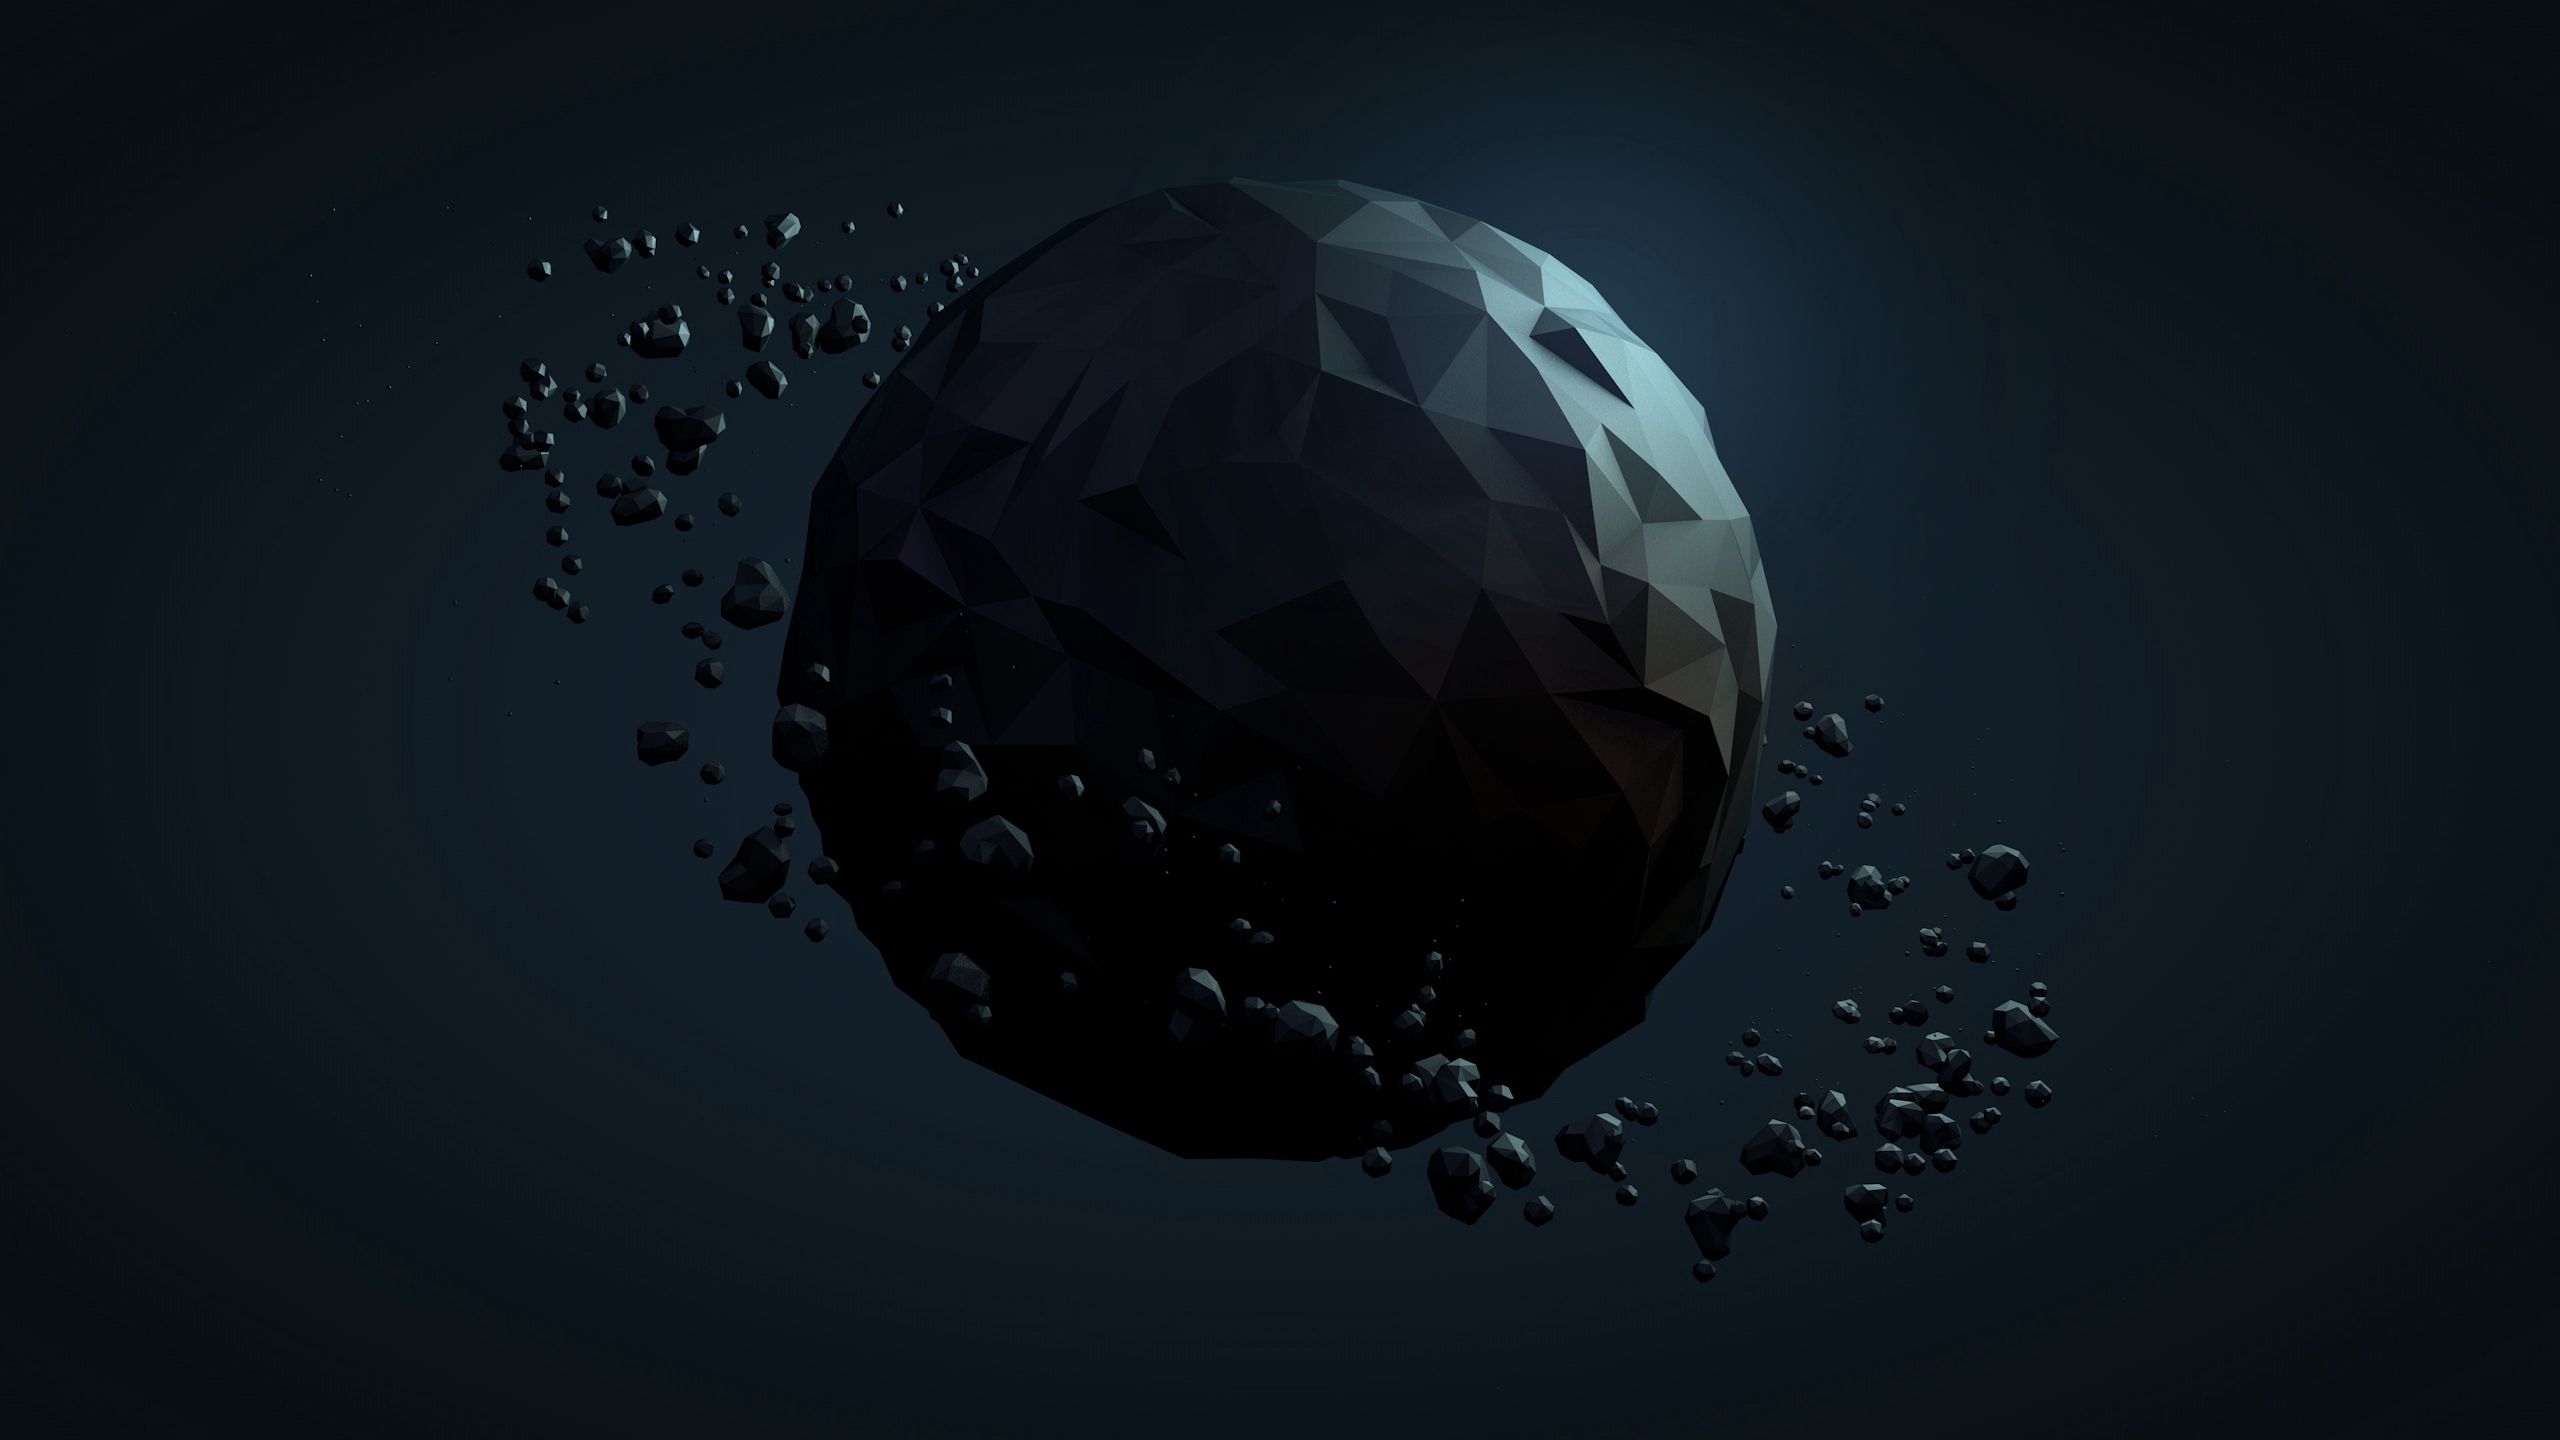 dark, planet, abstract, background, ball wallpapers for tablet